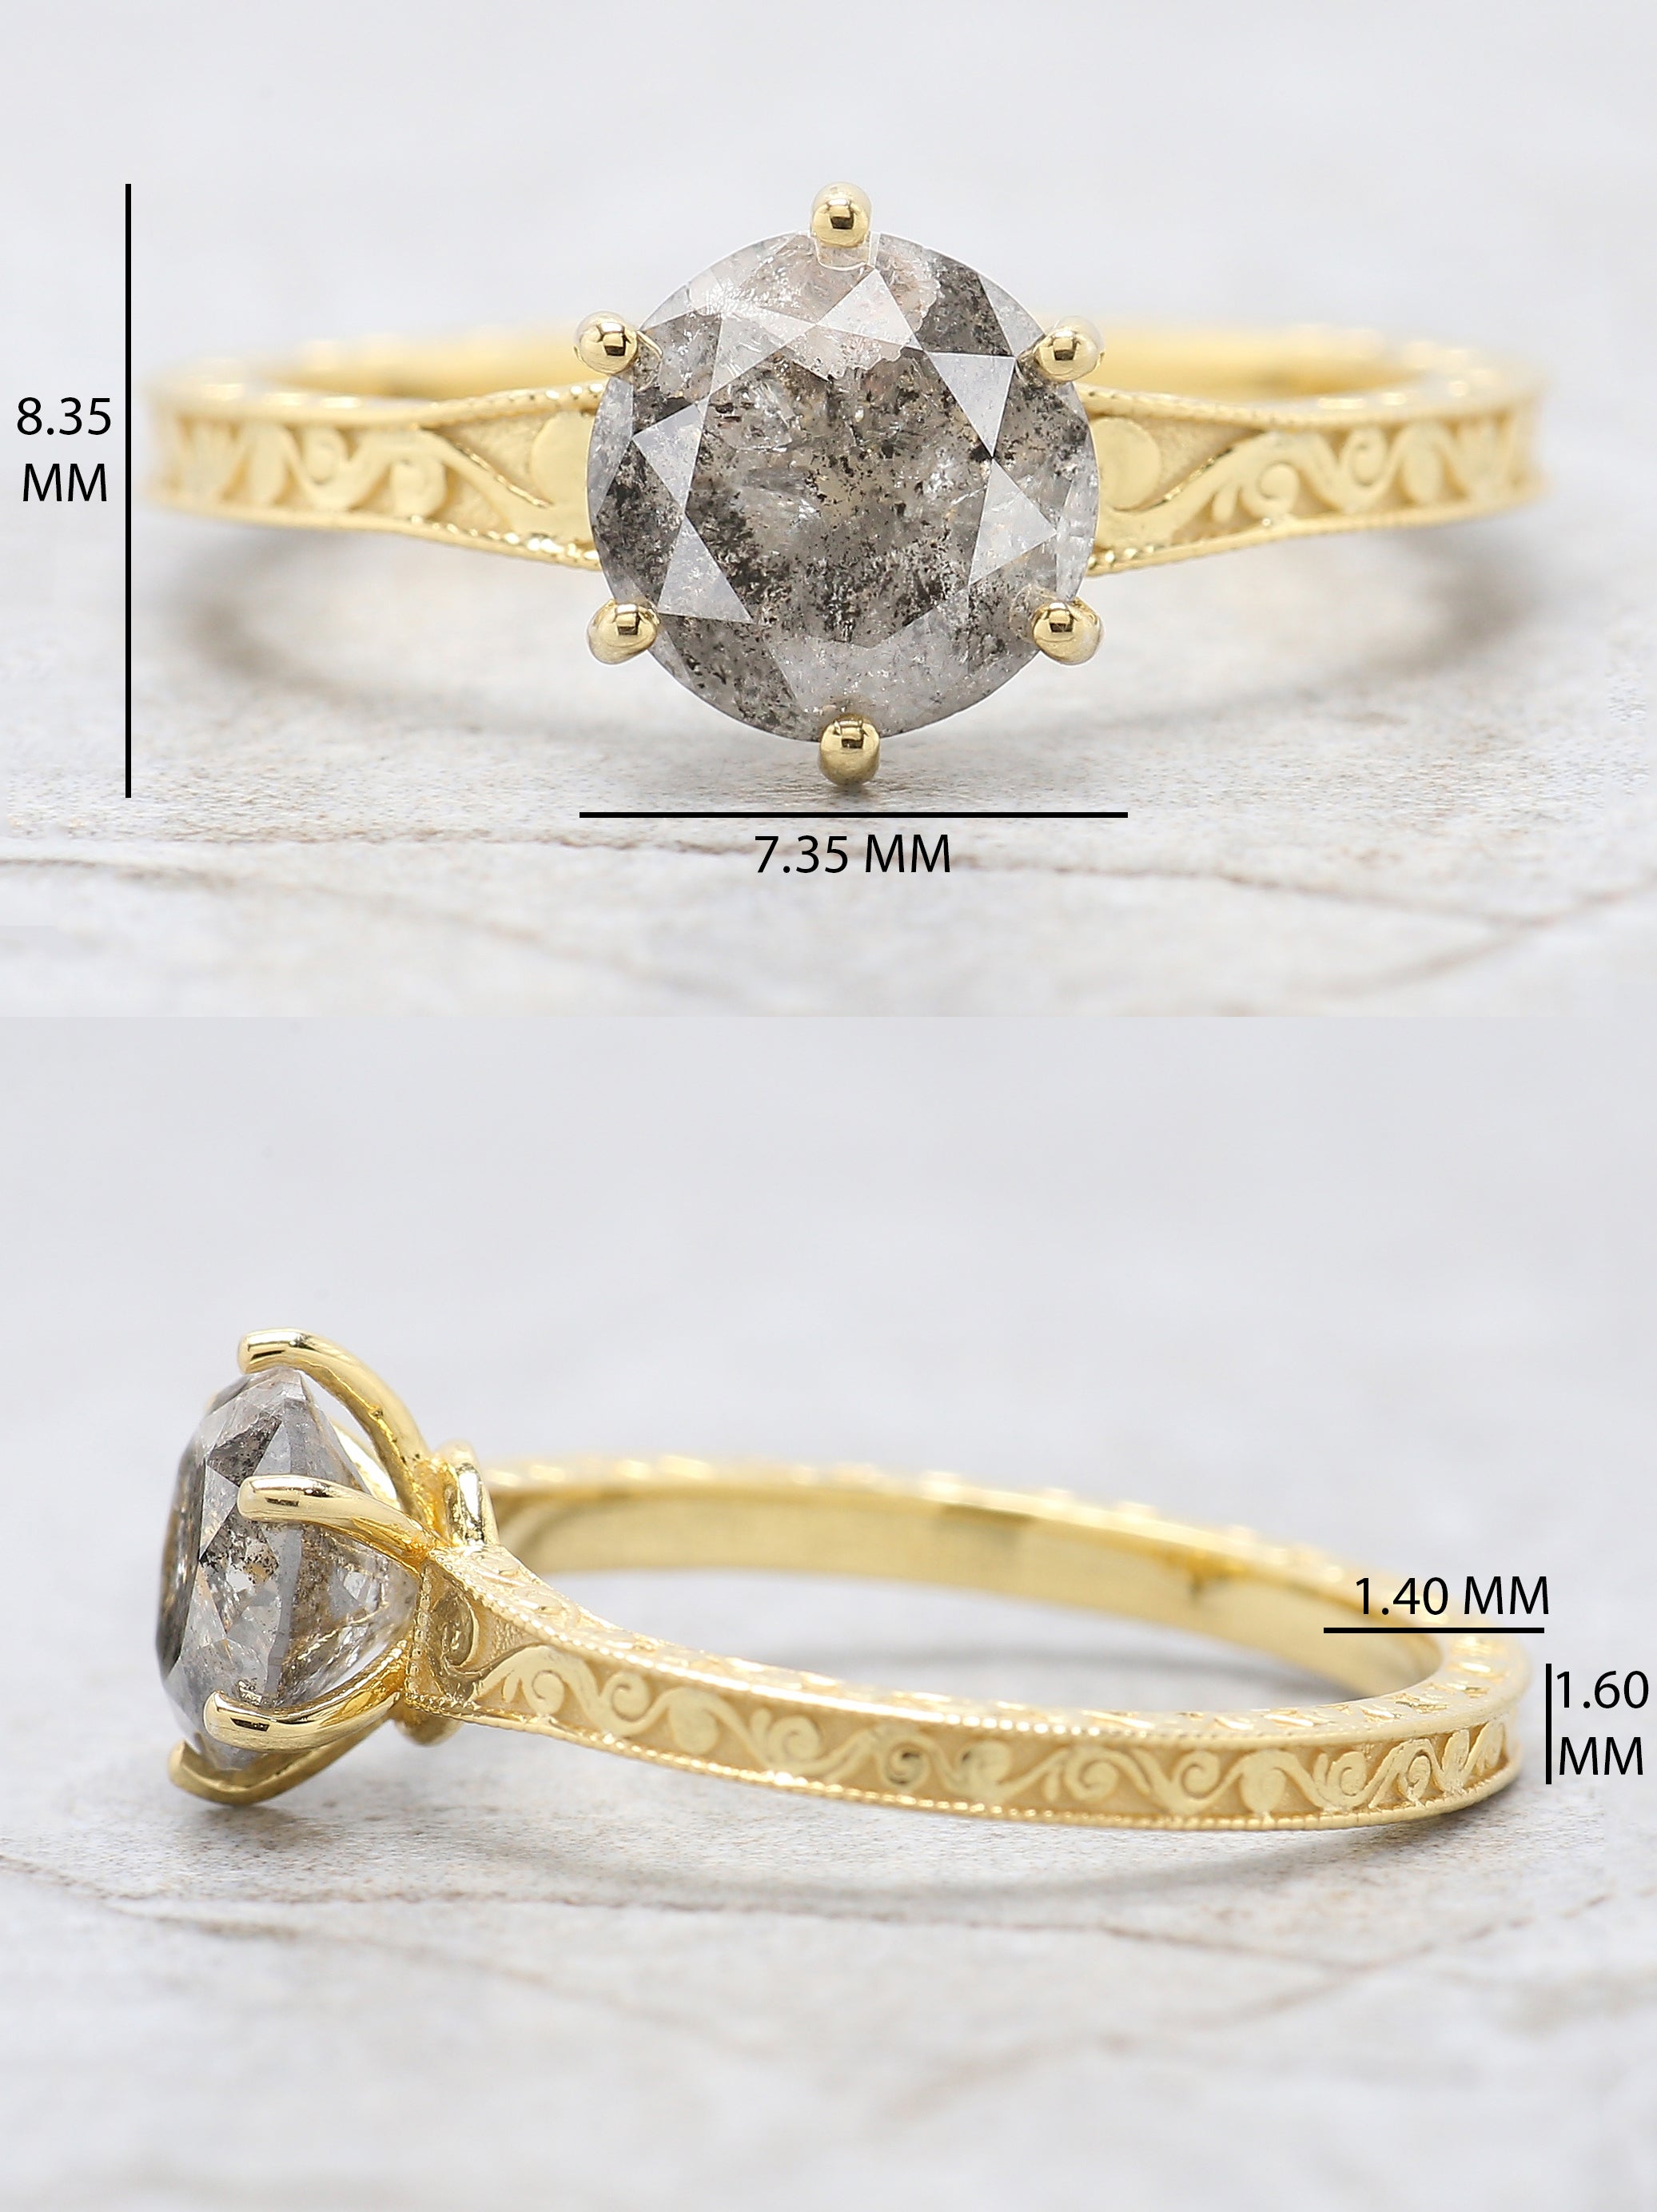 Round Cut Salt And Pepper Diamond Ring 1.35 Ct 7.00 MM Round Diamond Ring 14K Solid Yellow Gold Silver Engagement Ring Gift For Her QL433